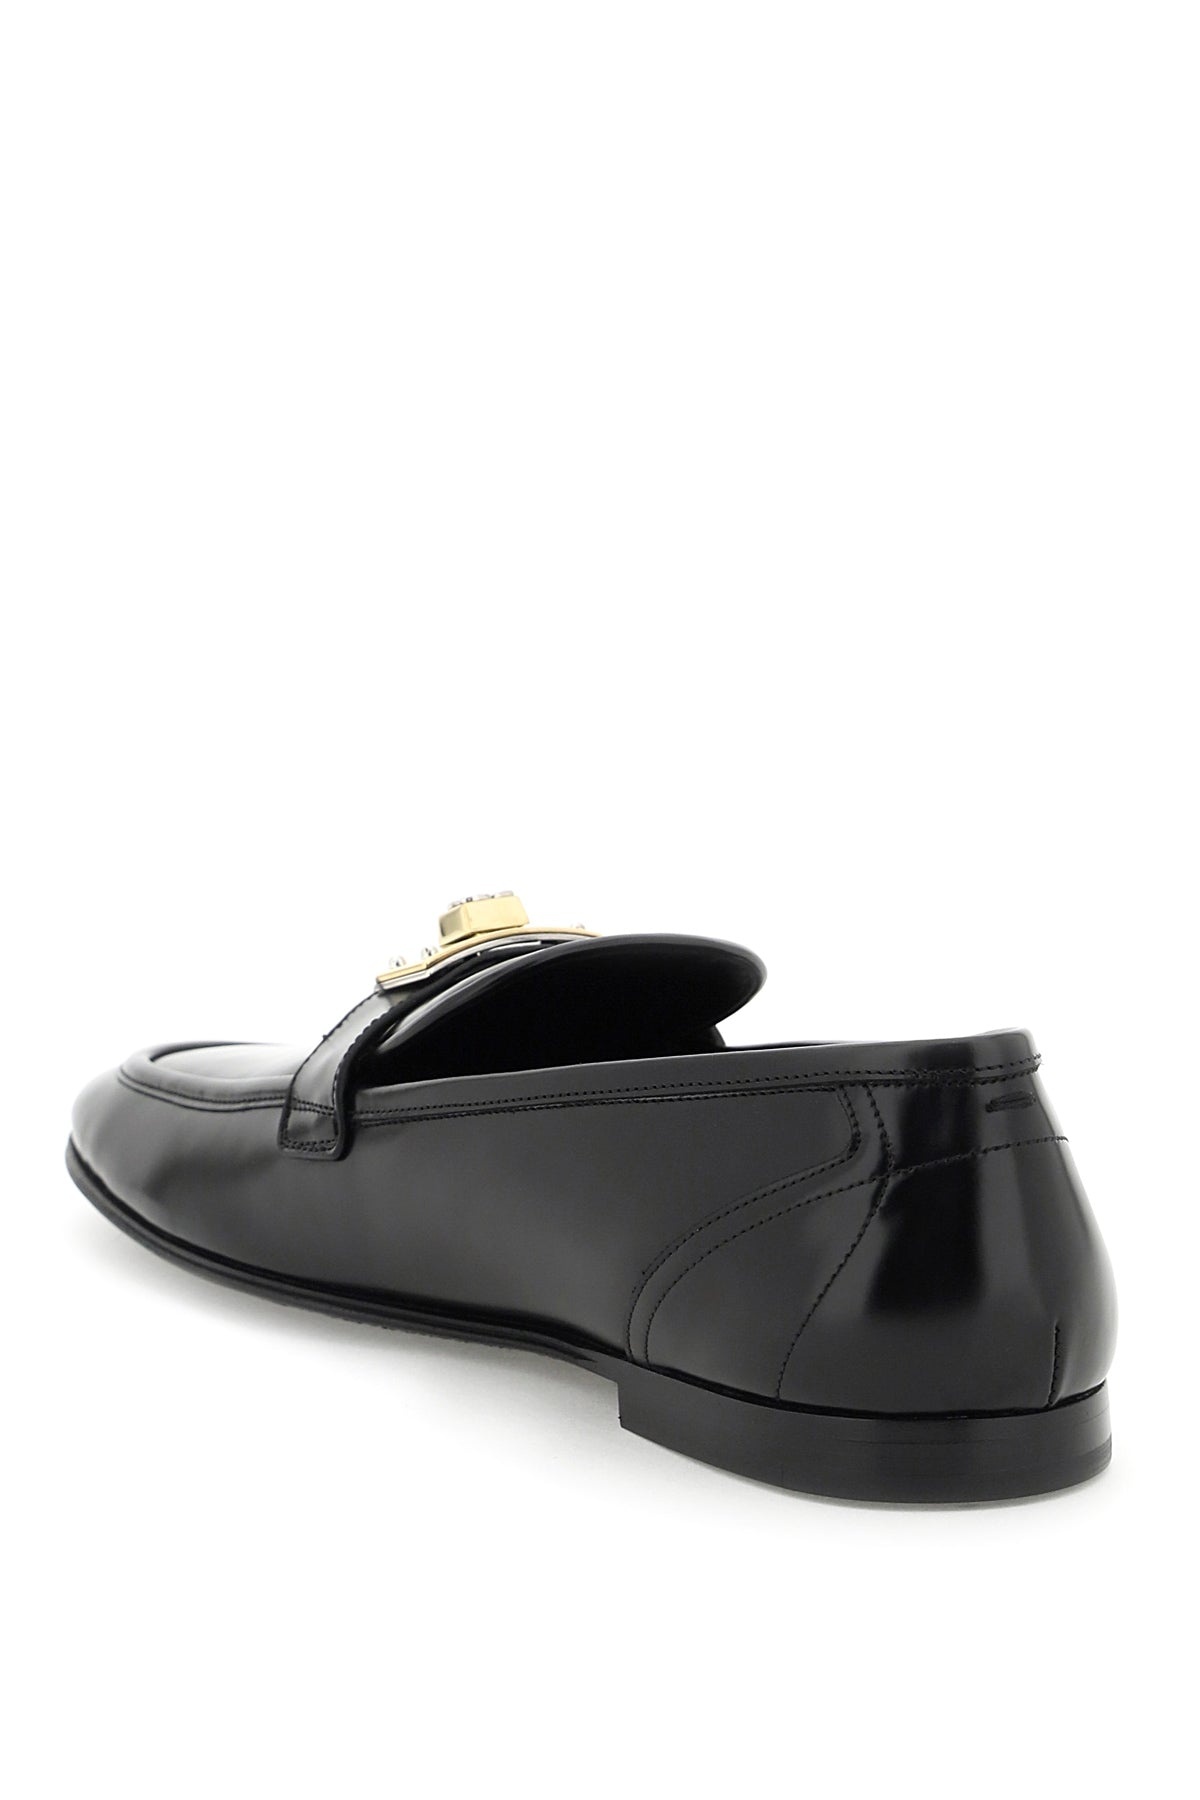 Dolce & Gabbana Leather Loafers Men - 2